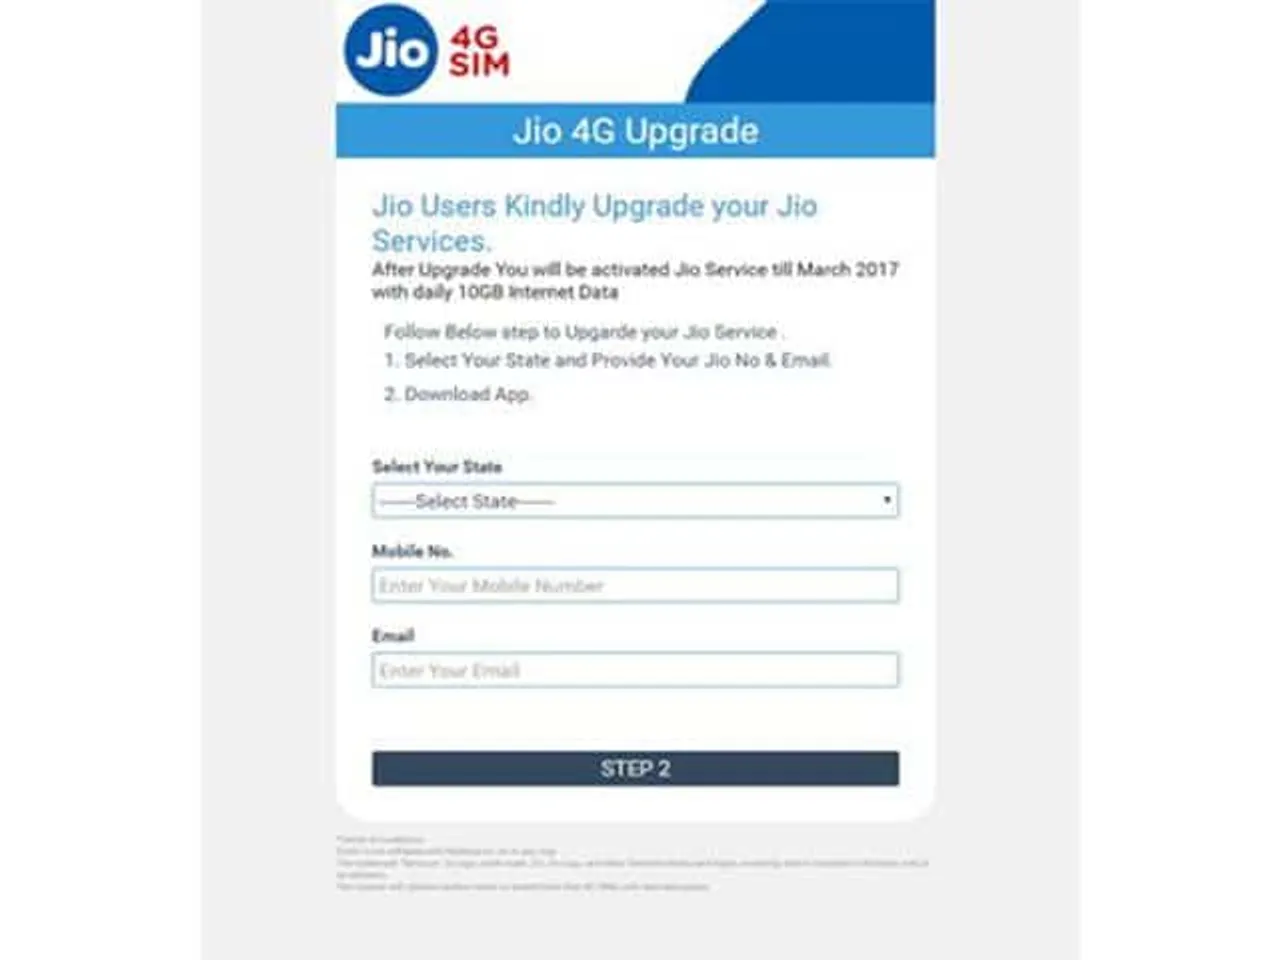 This message from Reliance Jio is a hoax